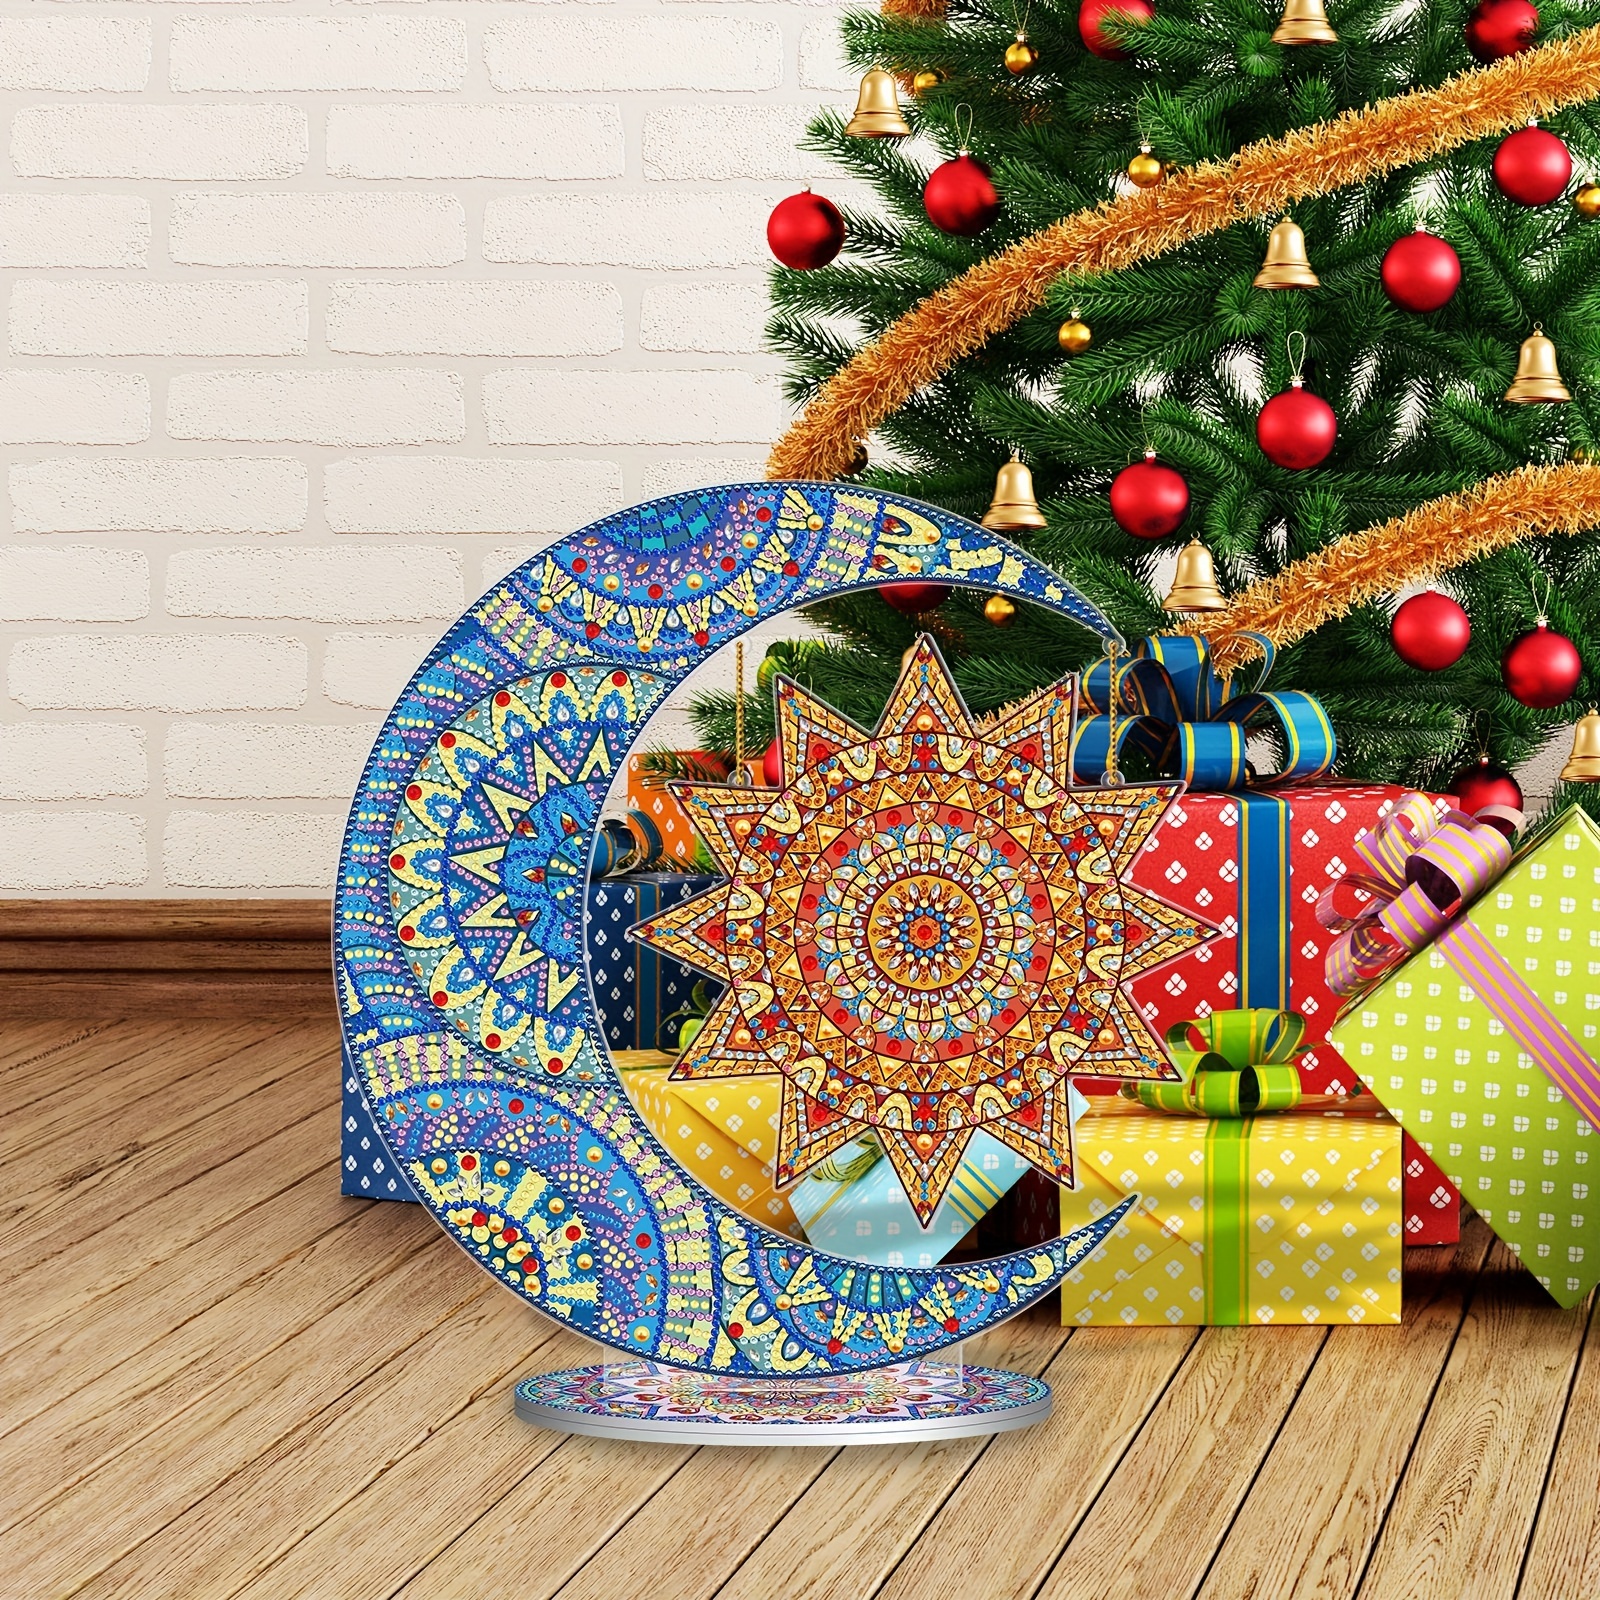 5D DIY Diamond Painting Ornaments Double Sided Crystal Painting